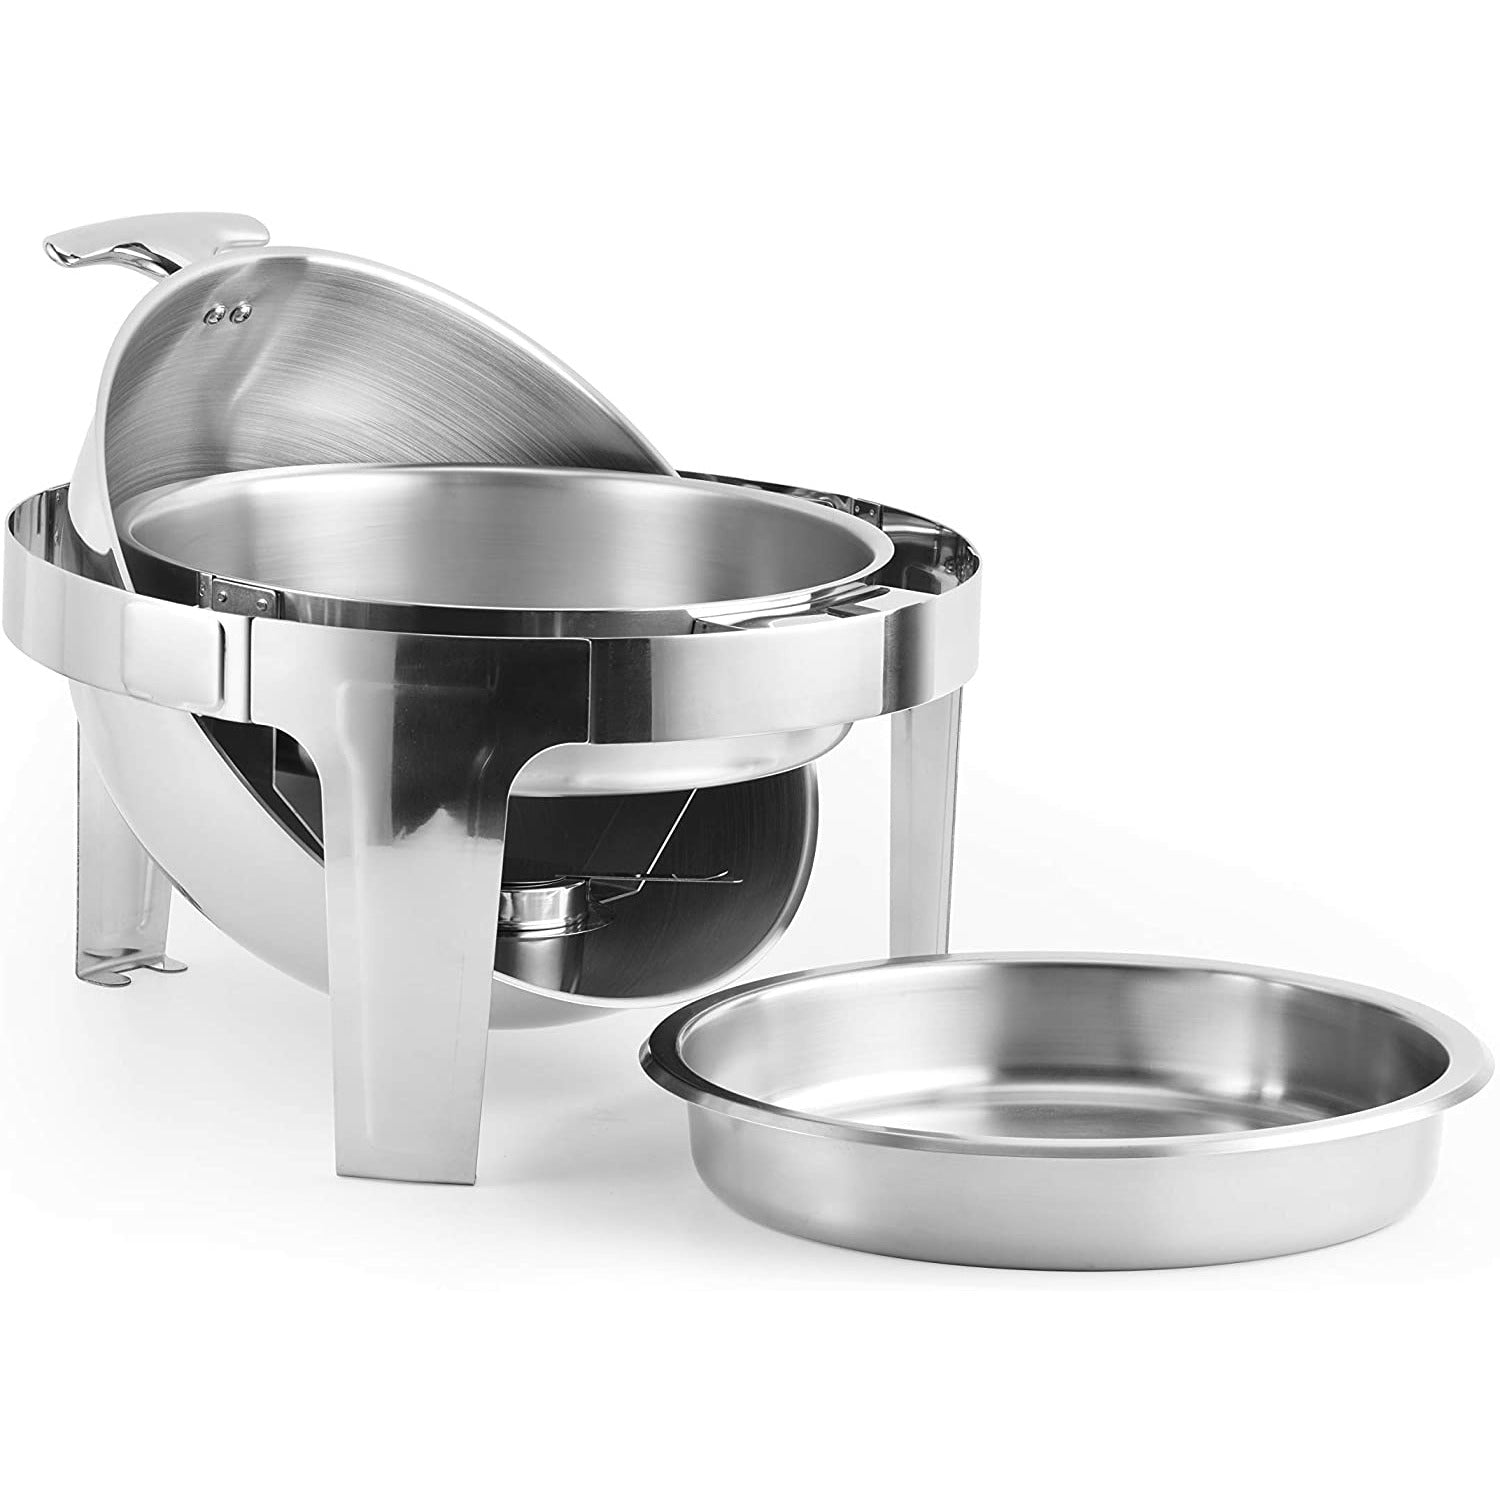 Chafer Chafing Dish Round Roll Top Bundle Stainless Steel 6 Quart (2-Pack)